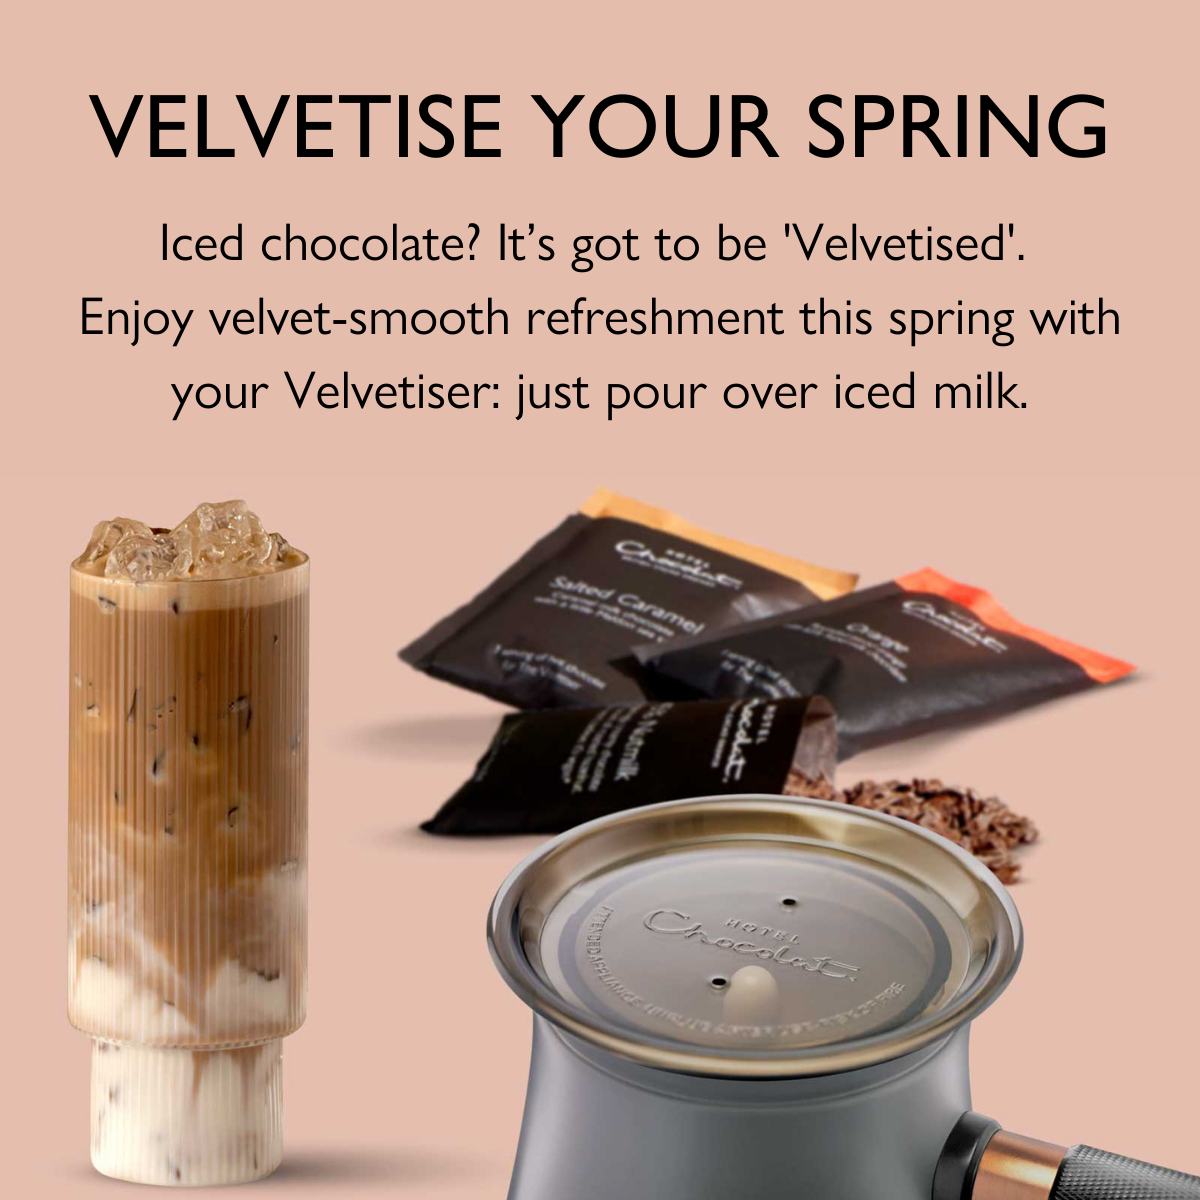 Velvetise your spring. Iced chocolate? It’s got to be velvetised. Enjoy velvet-smooth refreshments this spring with your Velvetiser: just pour over iced milk.